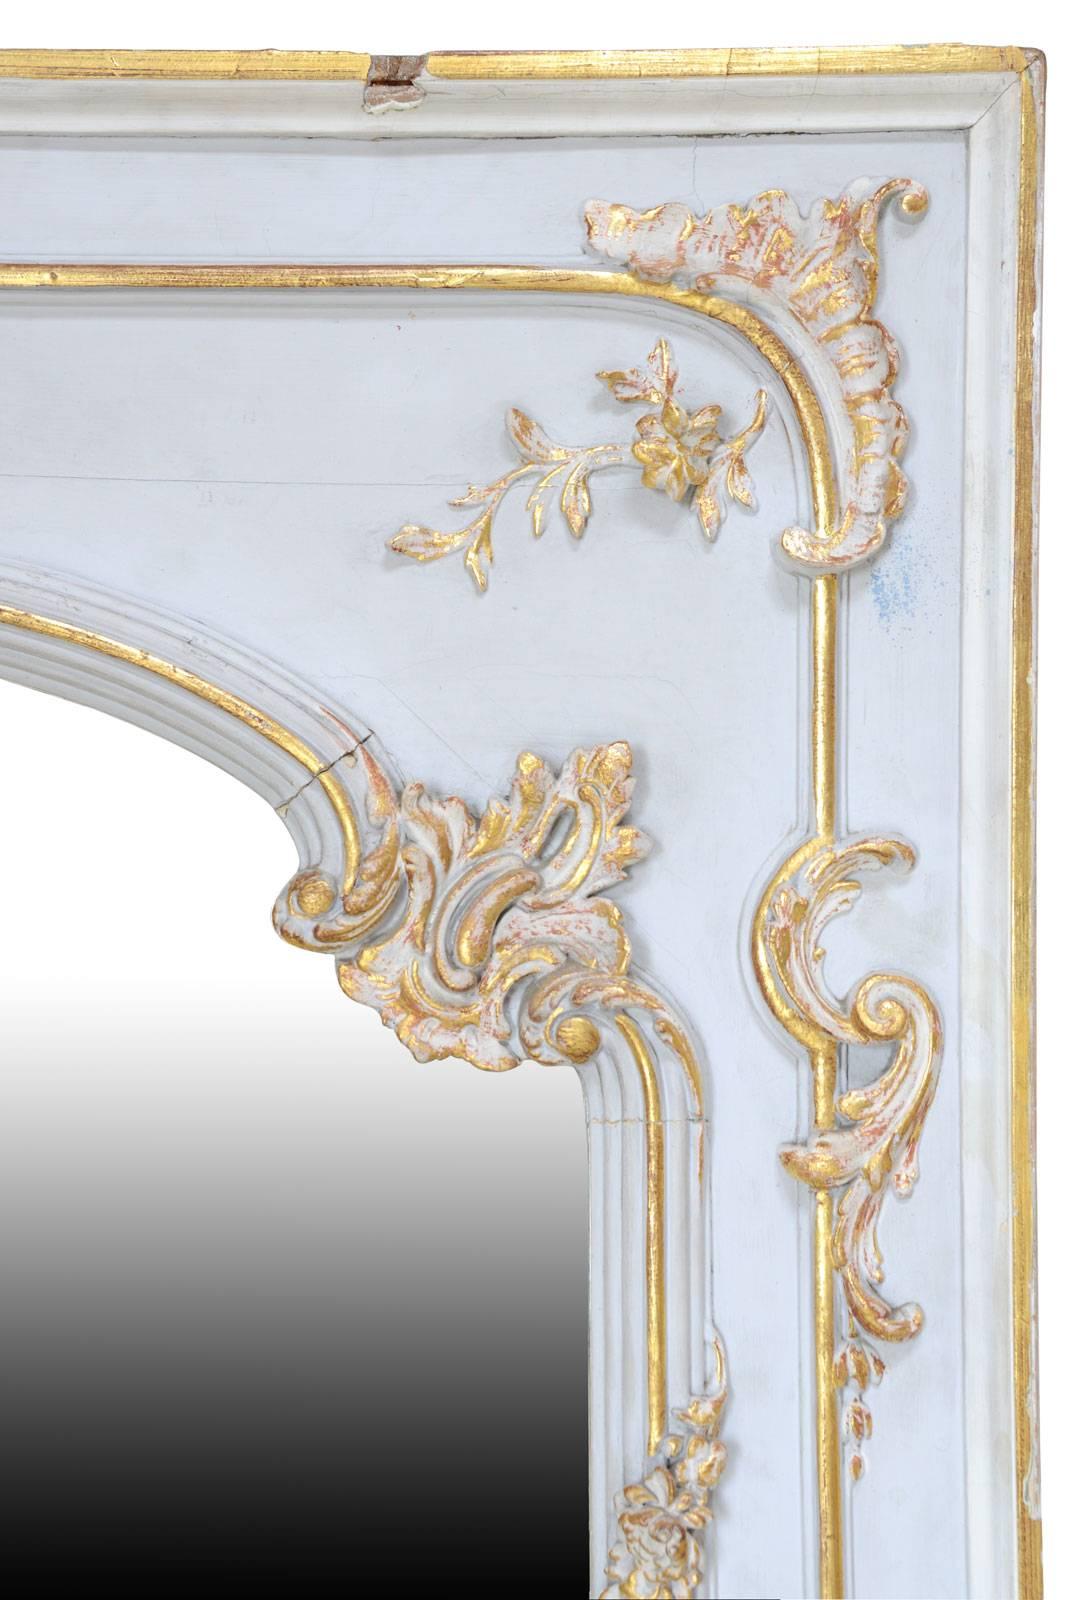 Dating from the 19th century, Louis XV style gilded wood and white rechampi mirror. It is animated with plants motifs and foliage, and a shell overlooks the mirror.